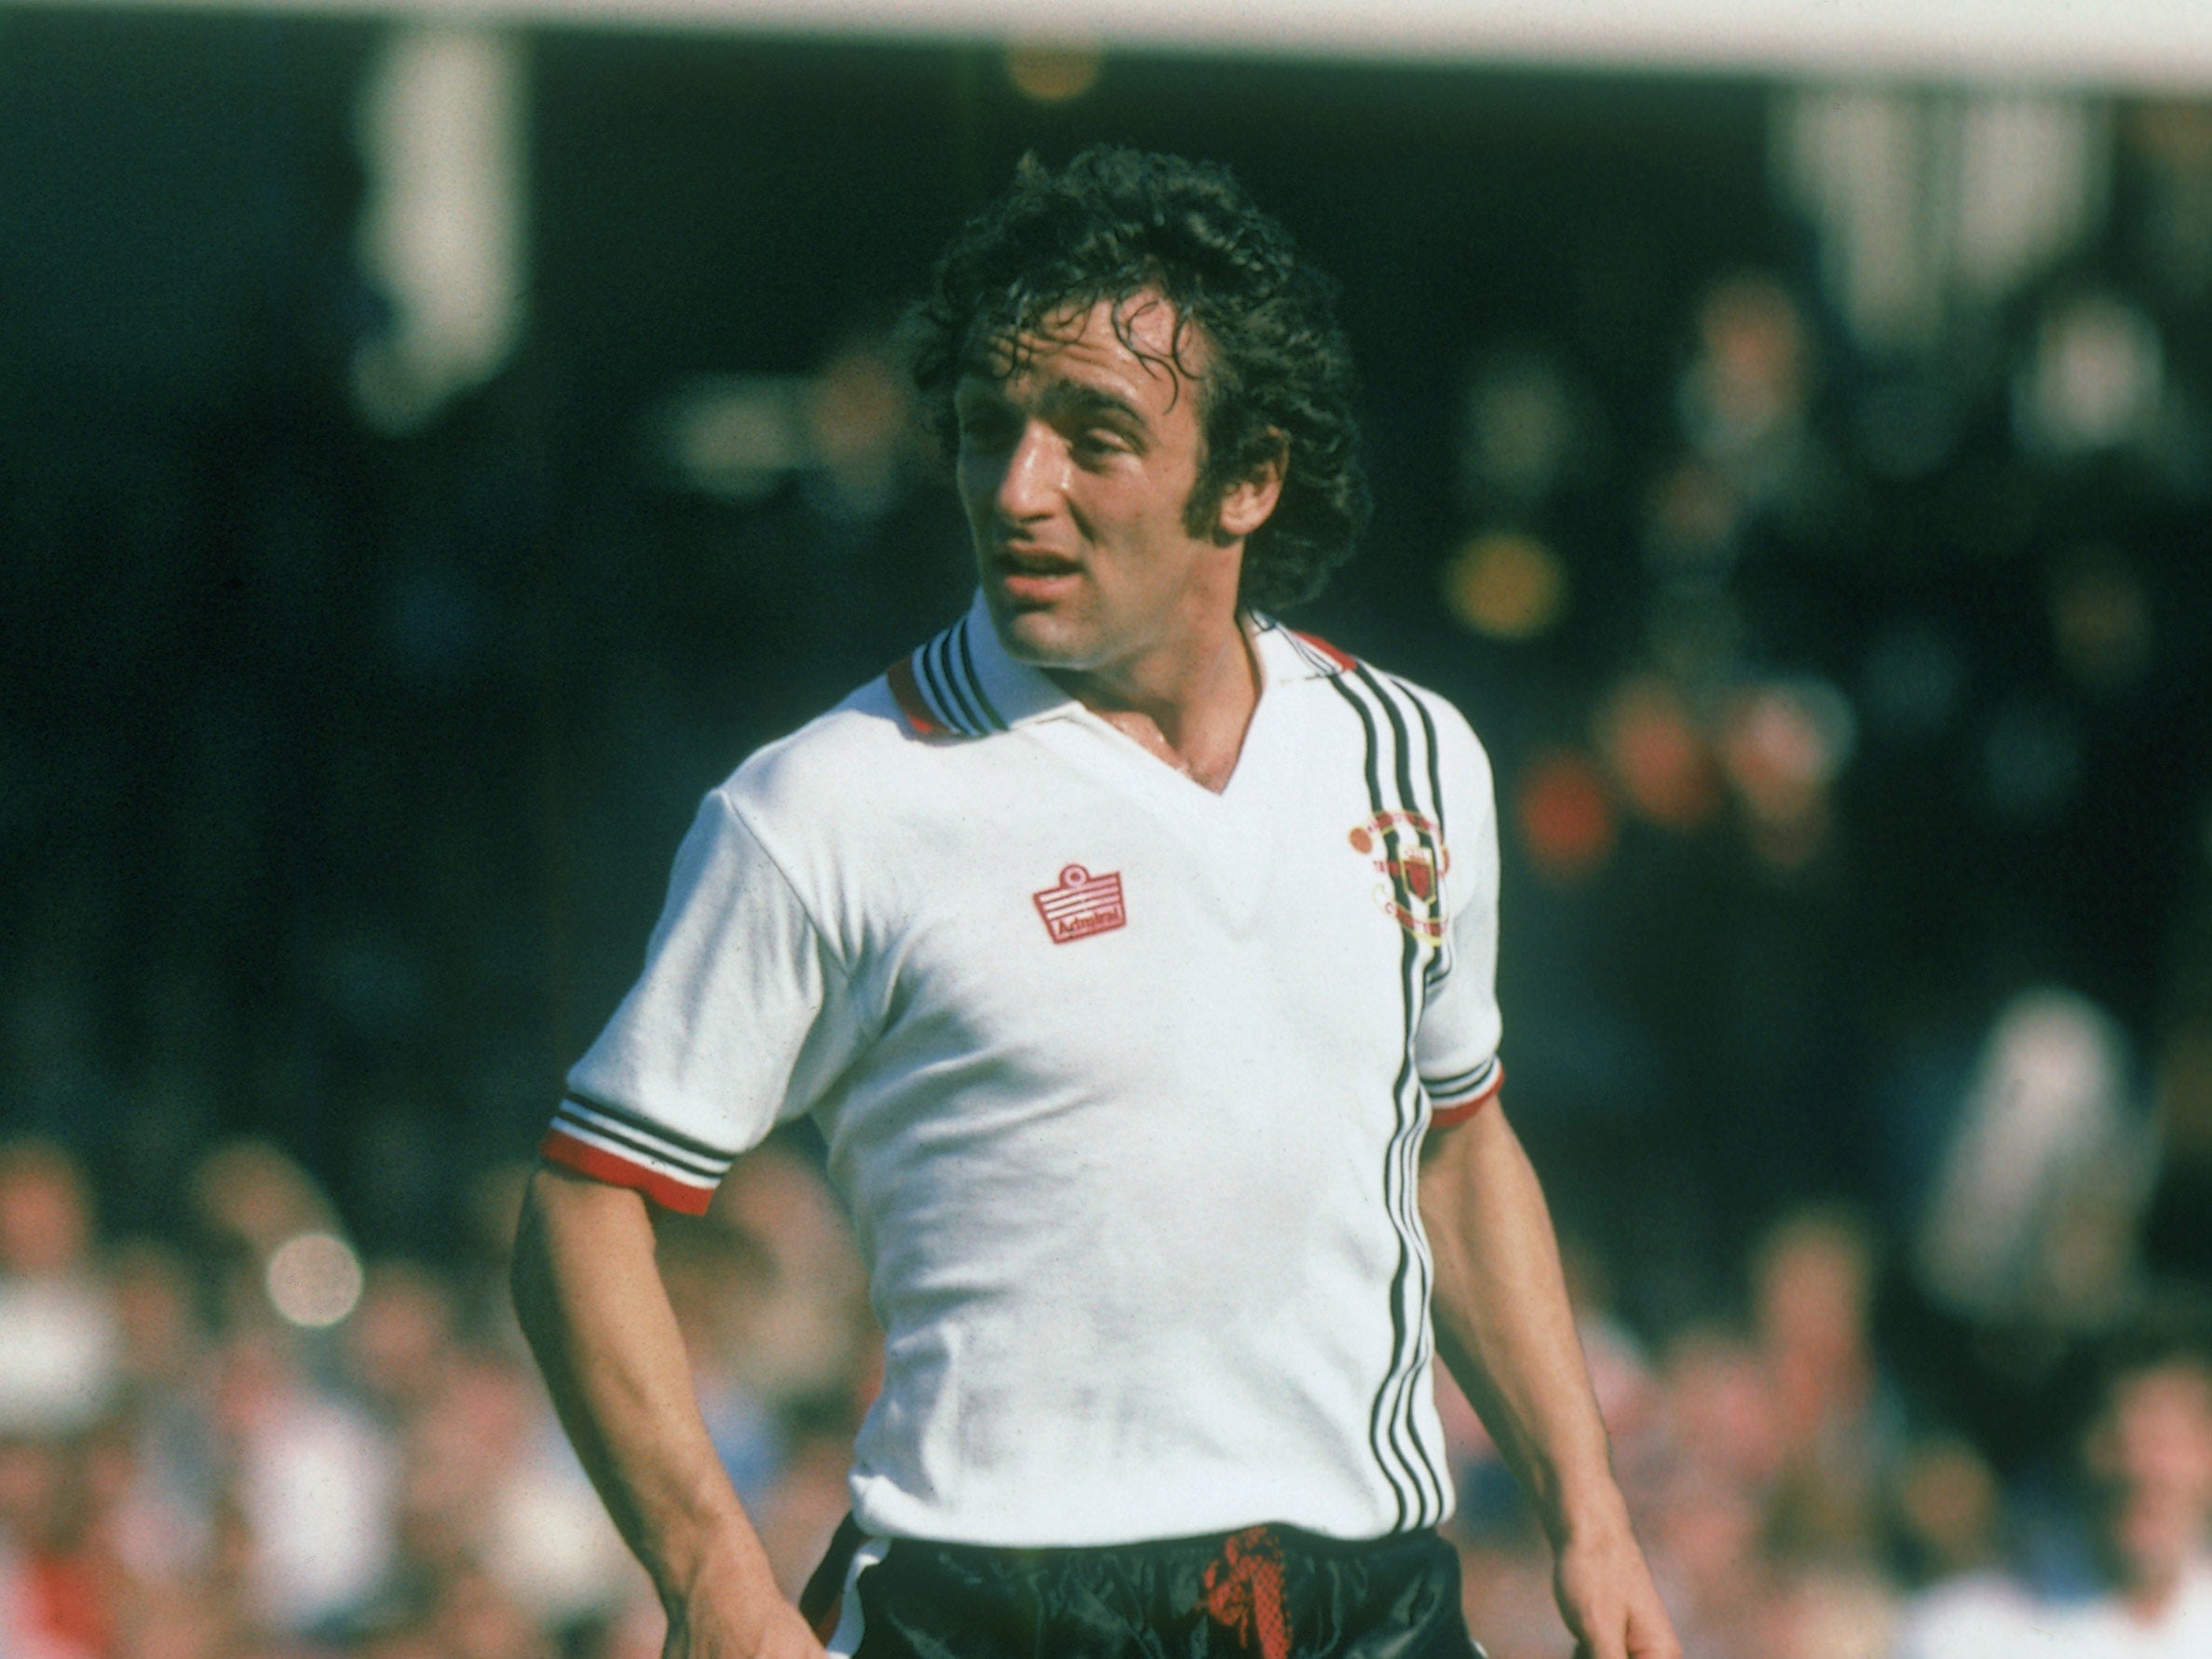 Macari played for Manchester United at the time